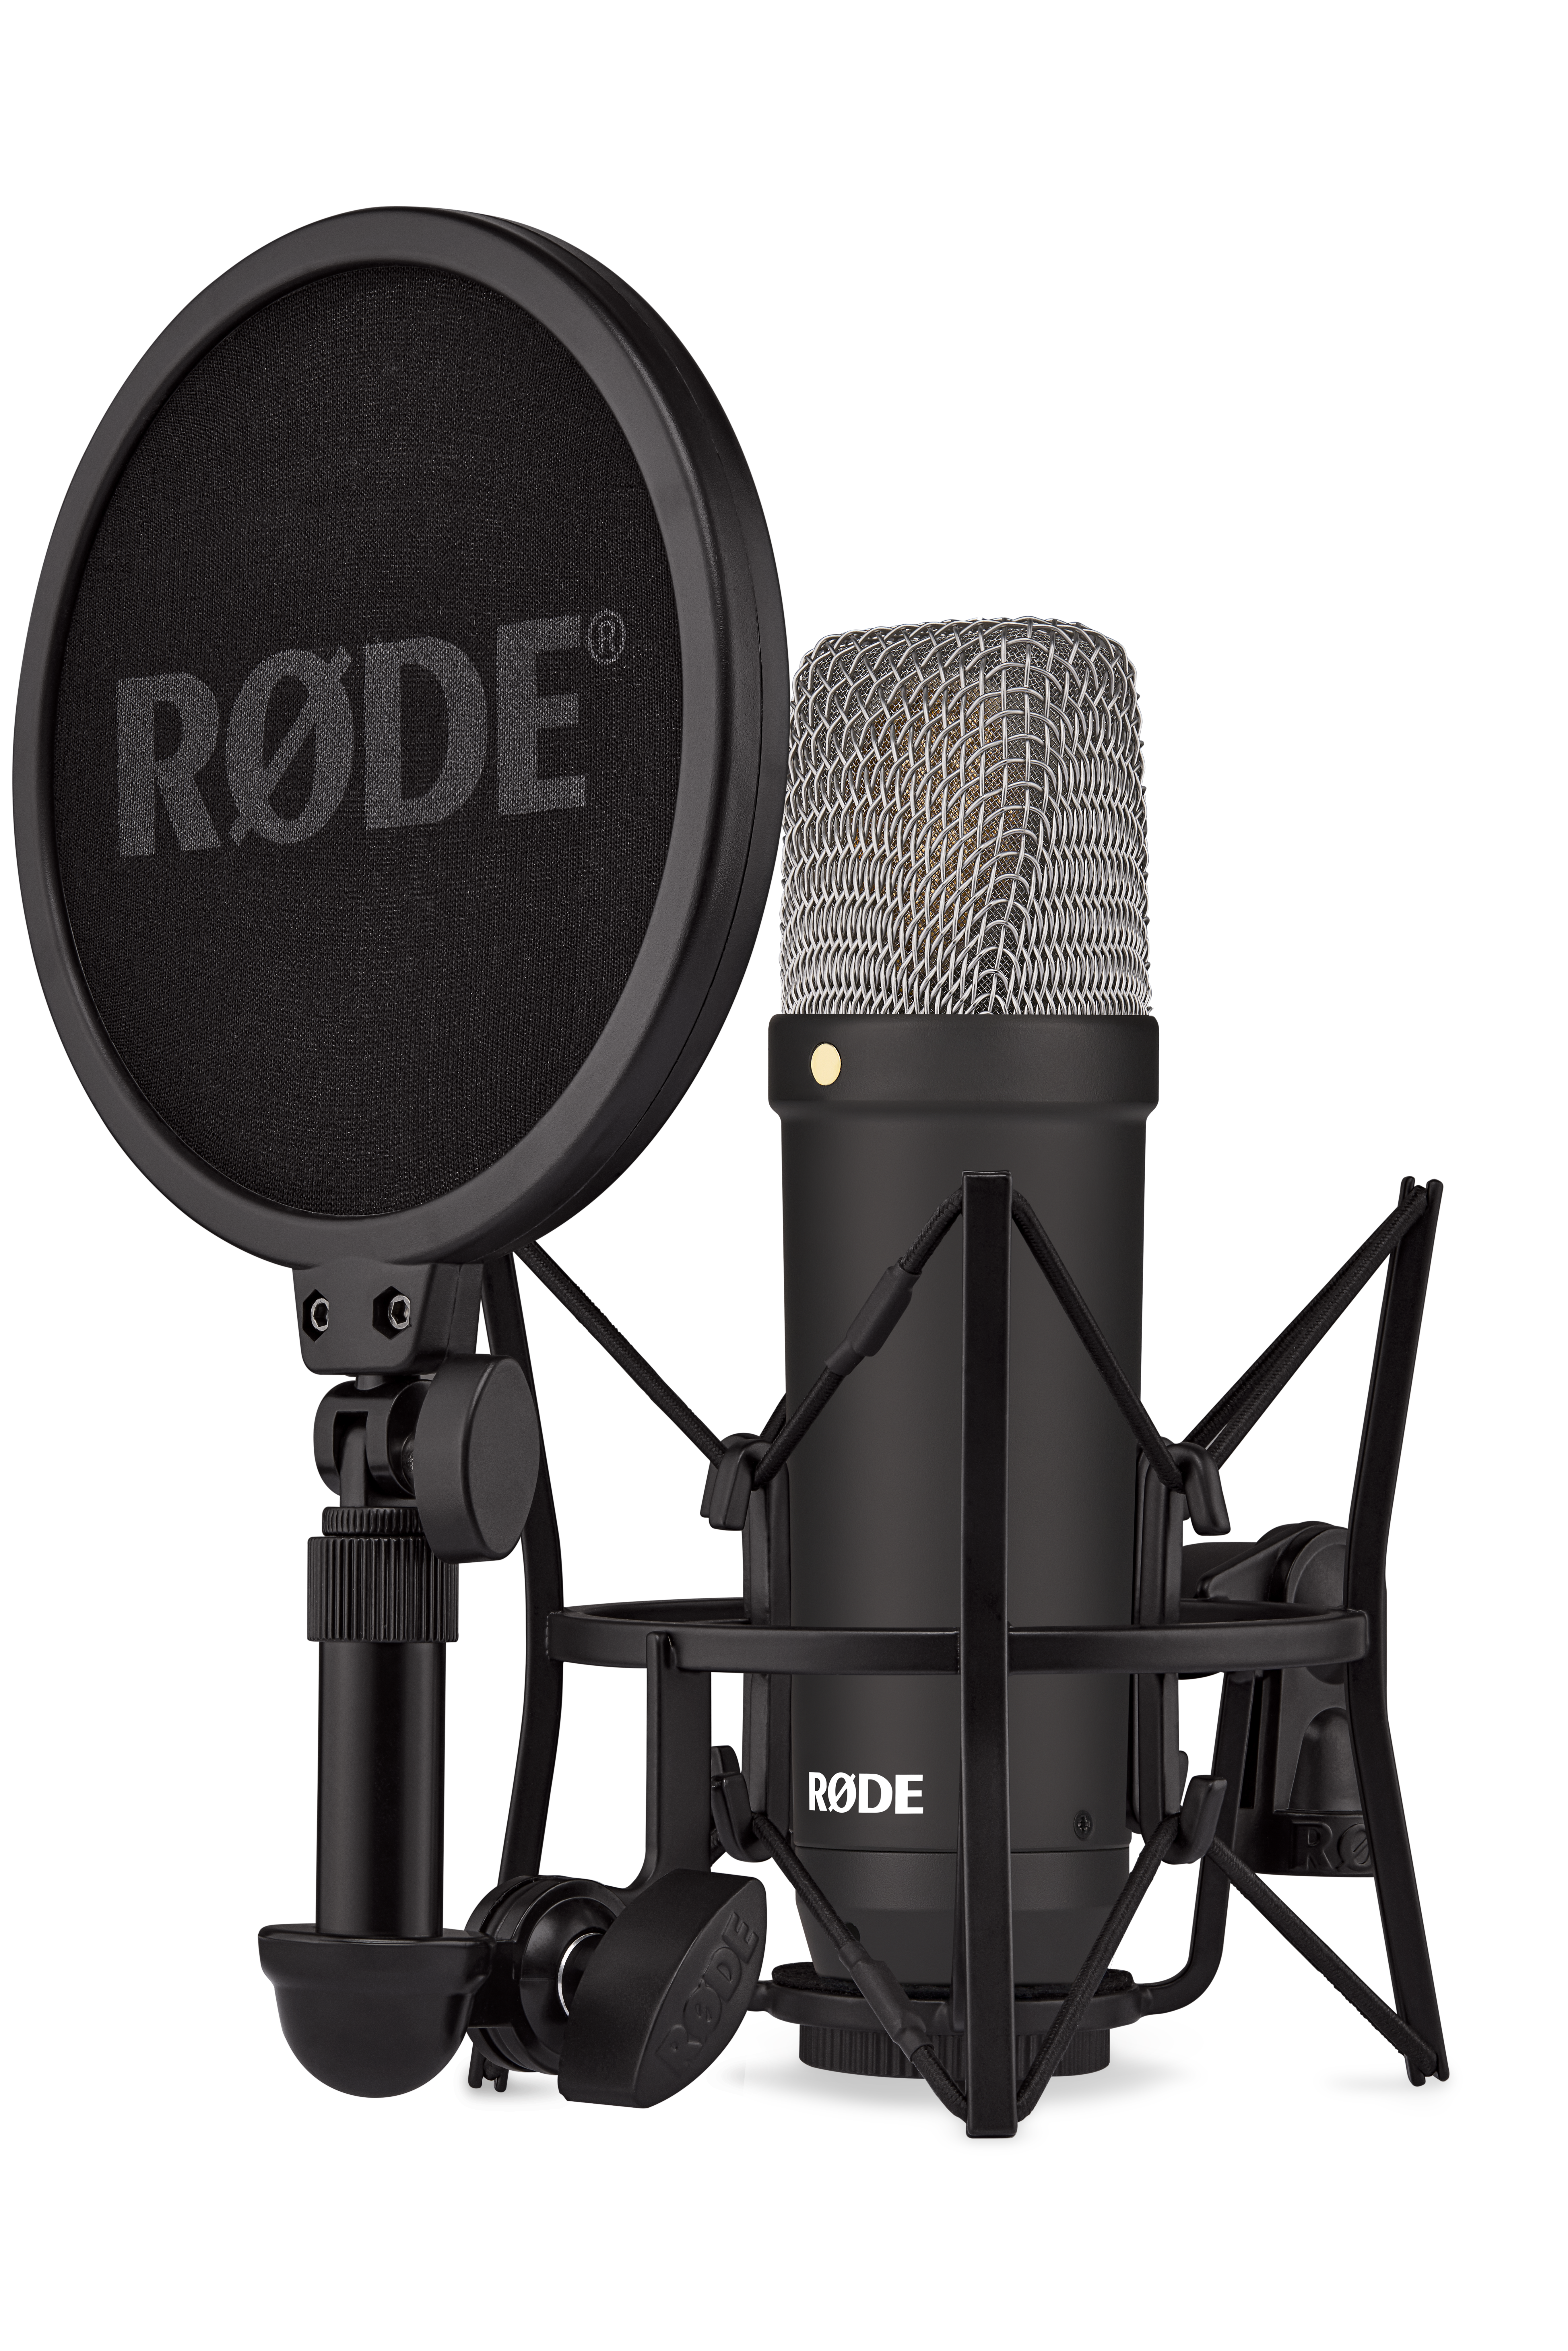 78 MICROPHONE ideas  microphone, microphones, recording microphone